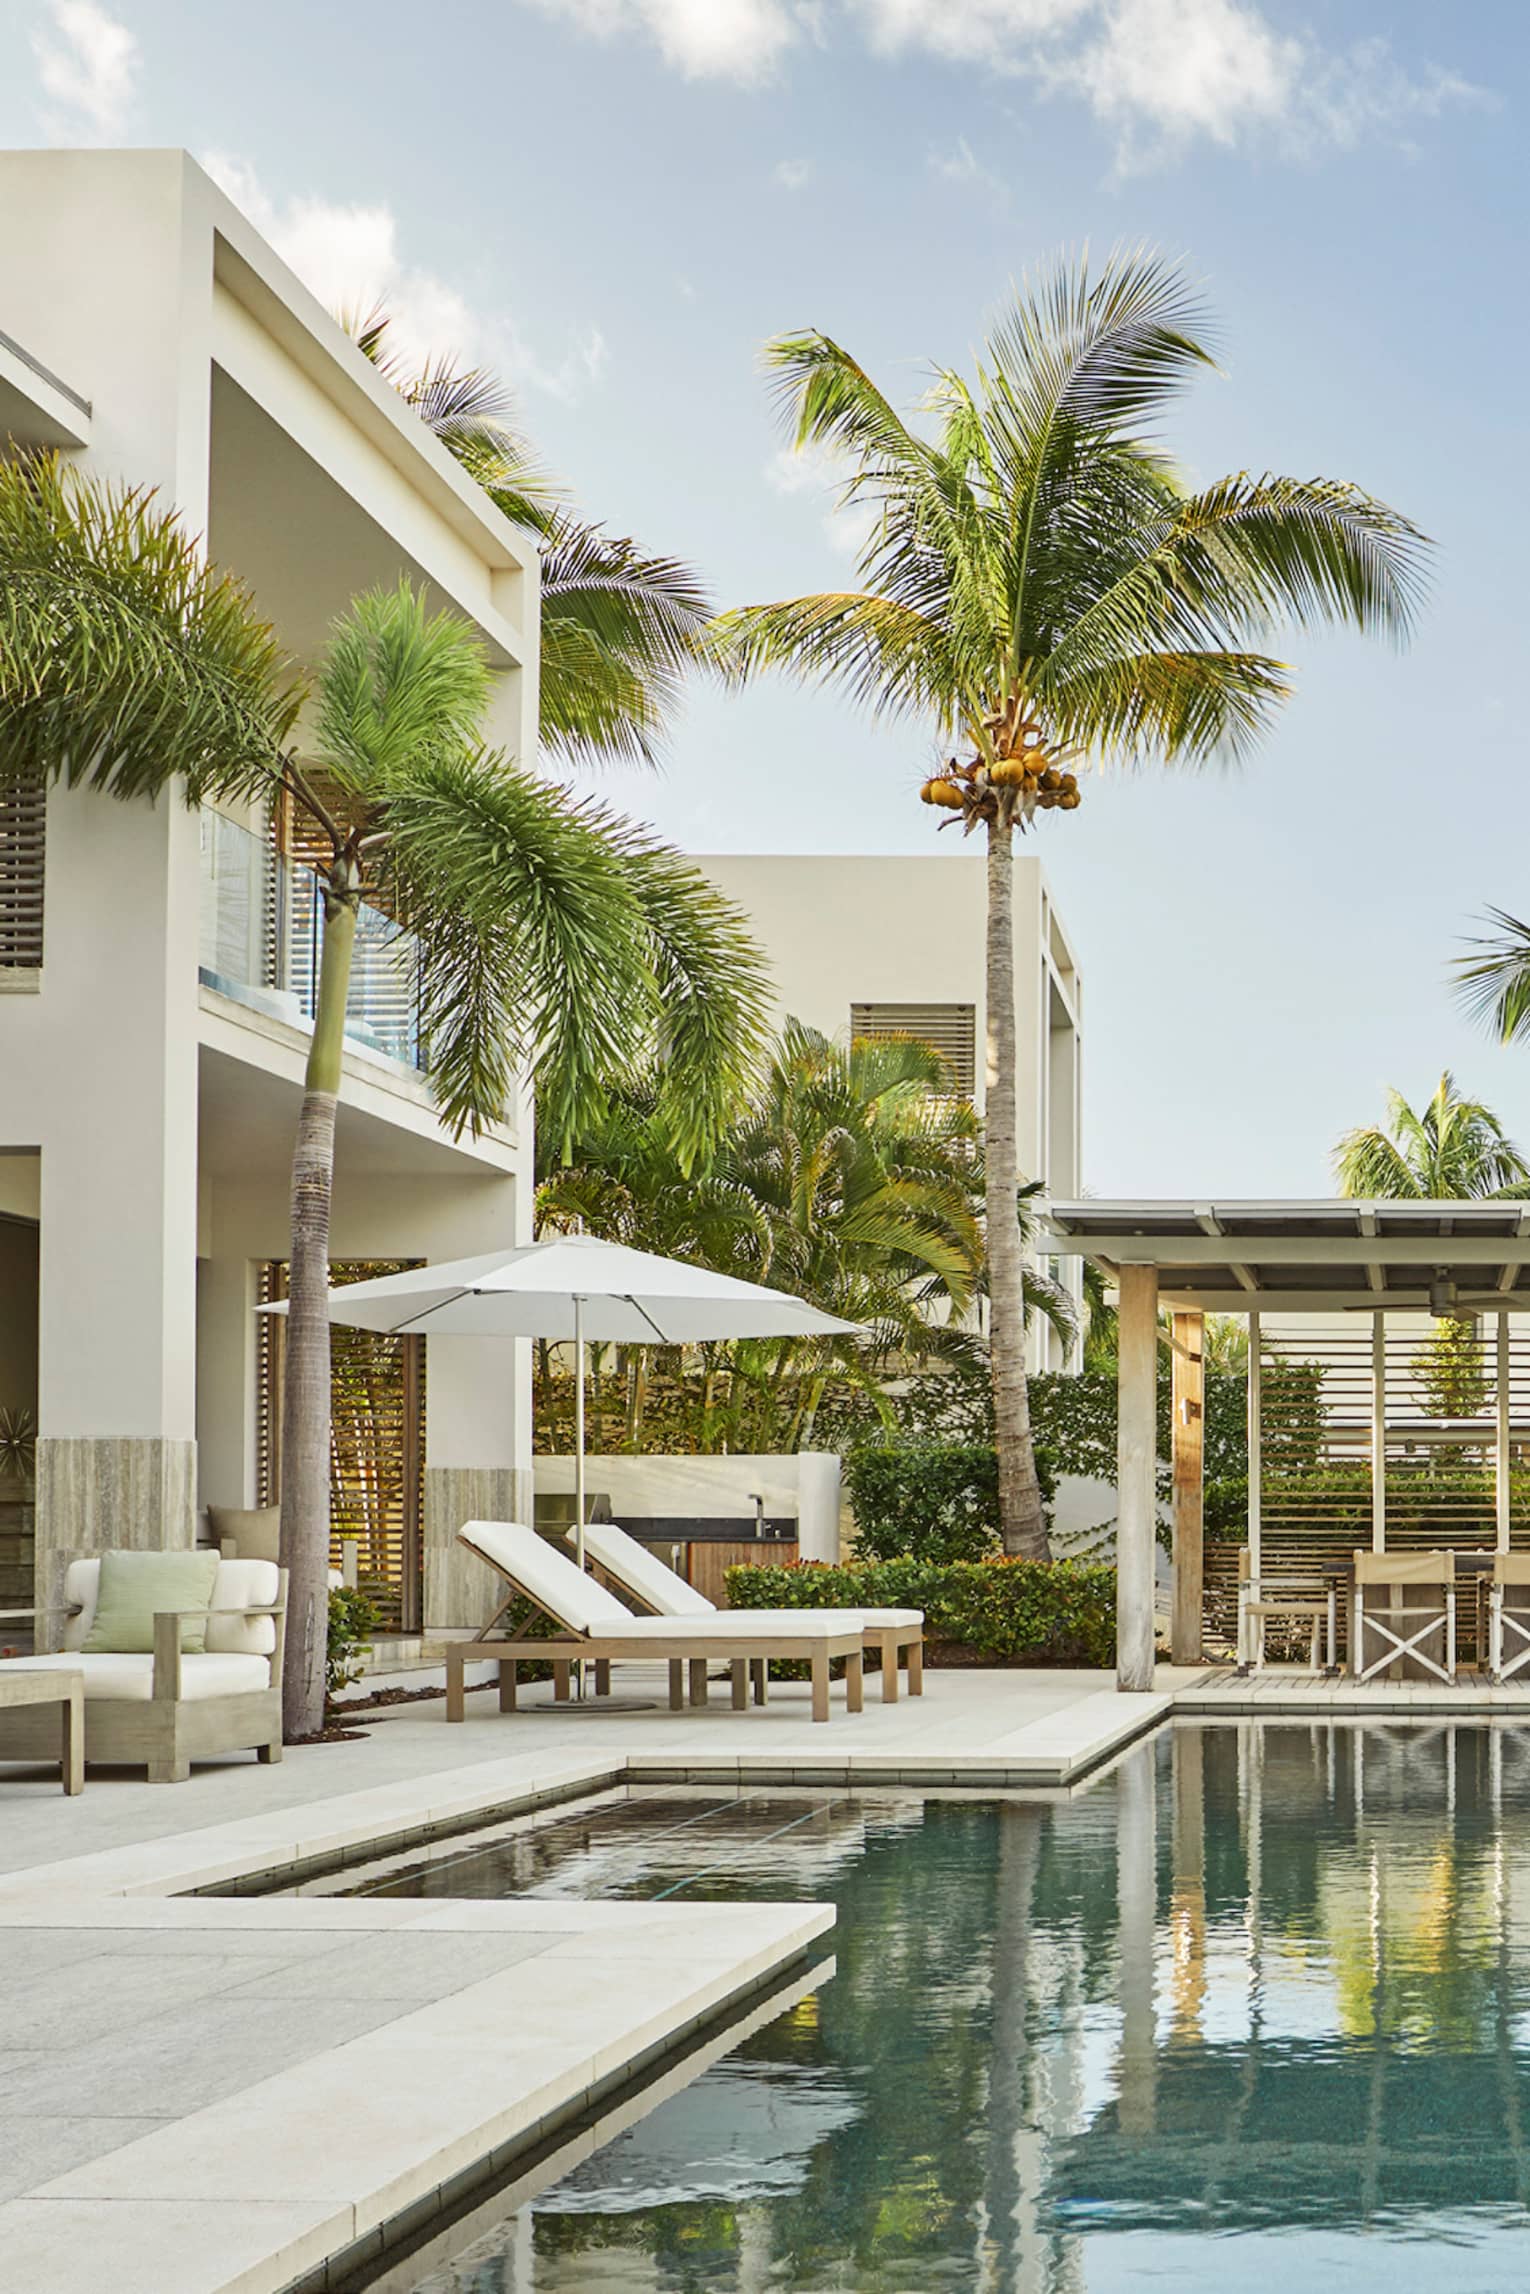 Tall palm trees reflecting on private pool on patio under two storey white villa